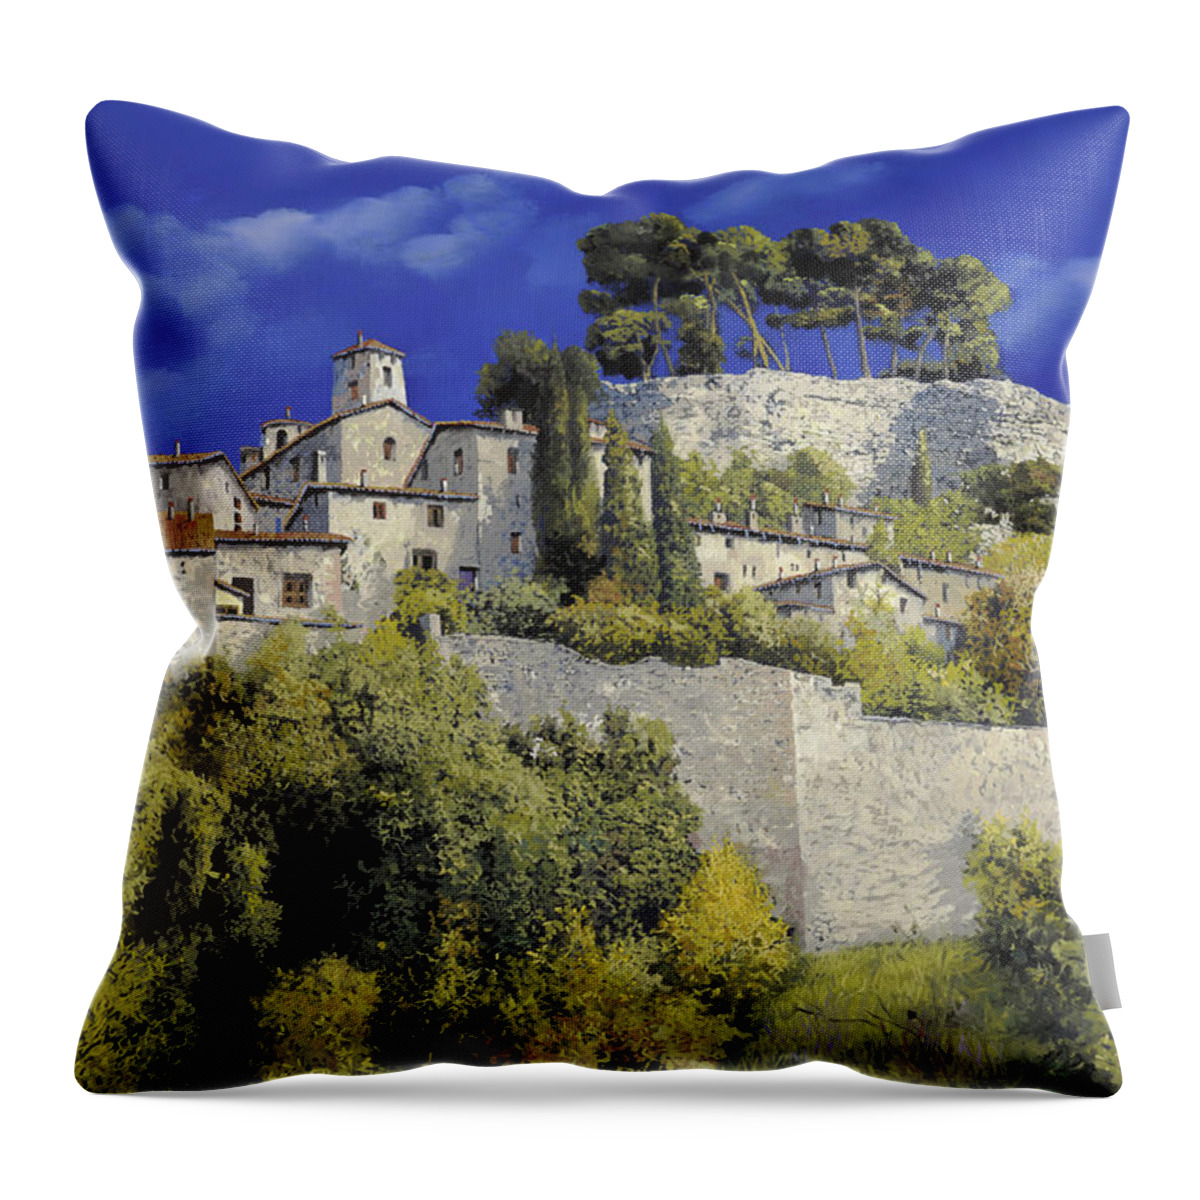 Blue Village Throw Pillow featuring the painting Il Villaggio In Blu by Guido Borelli